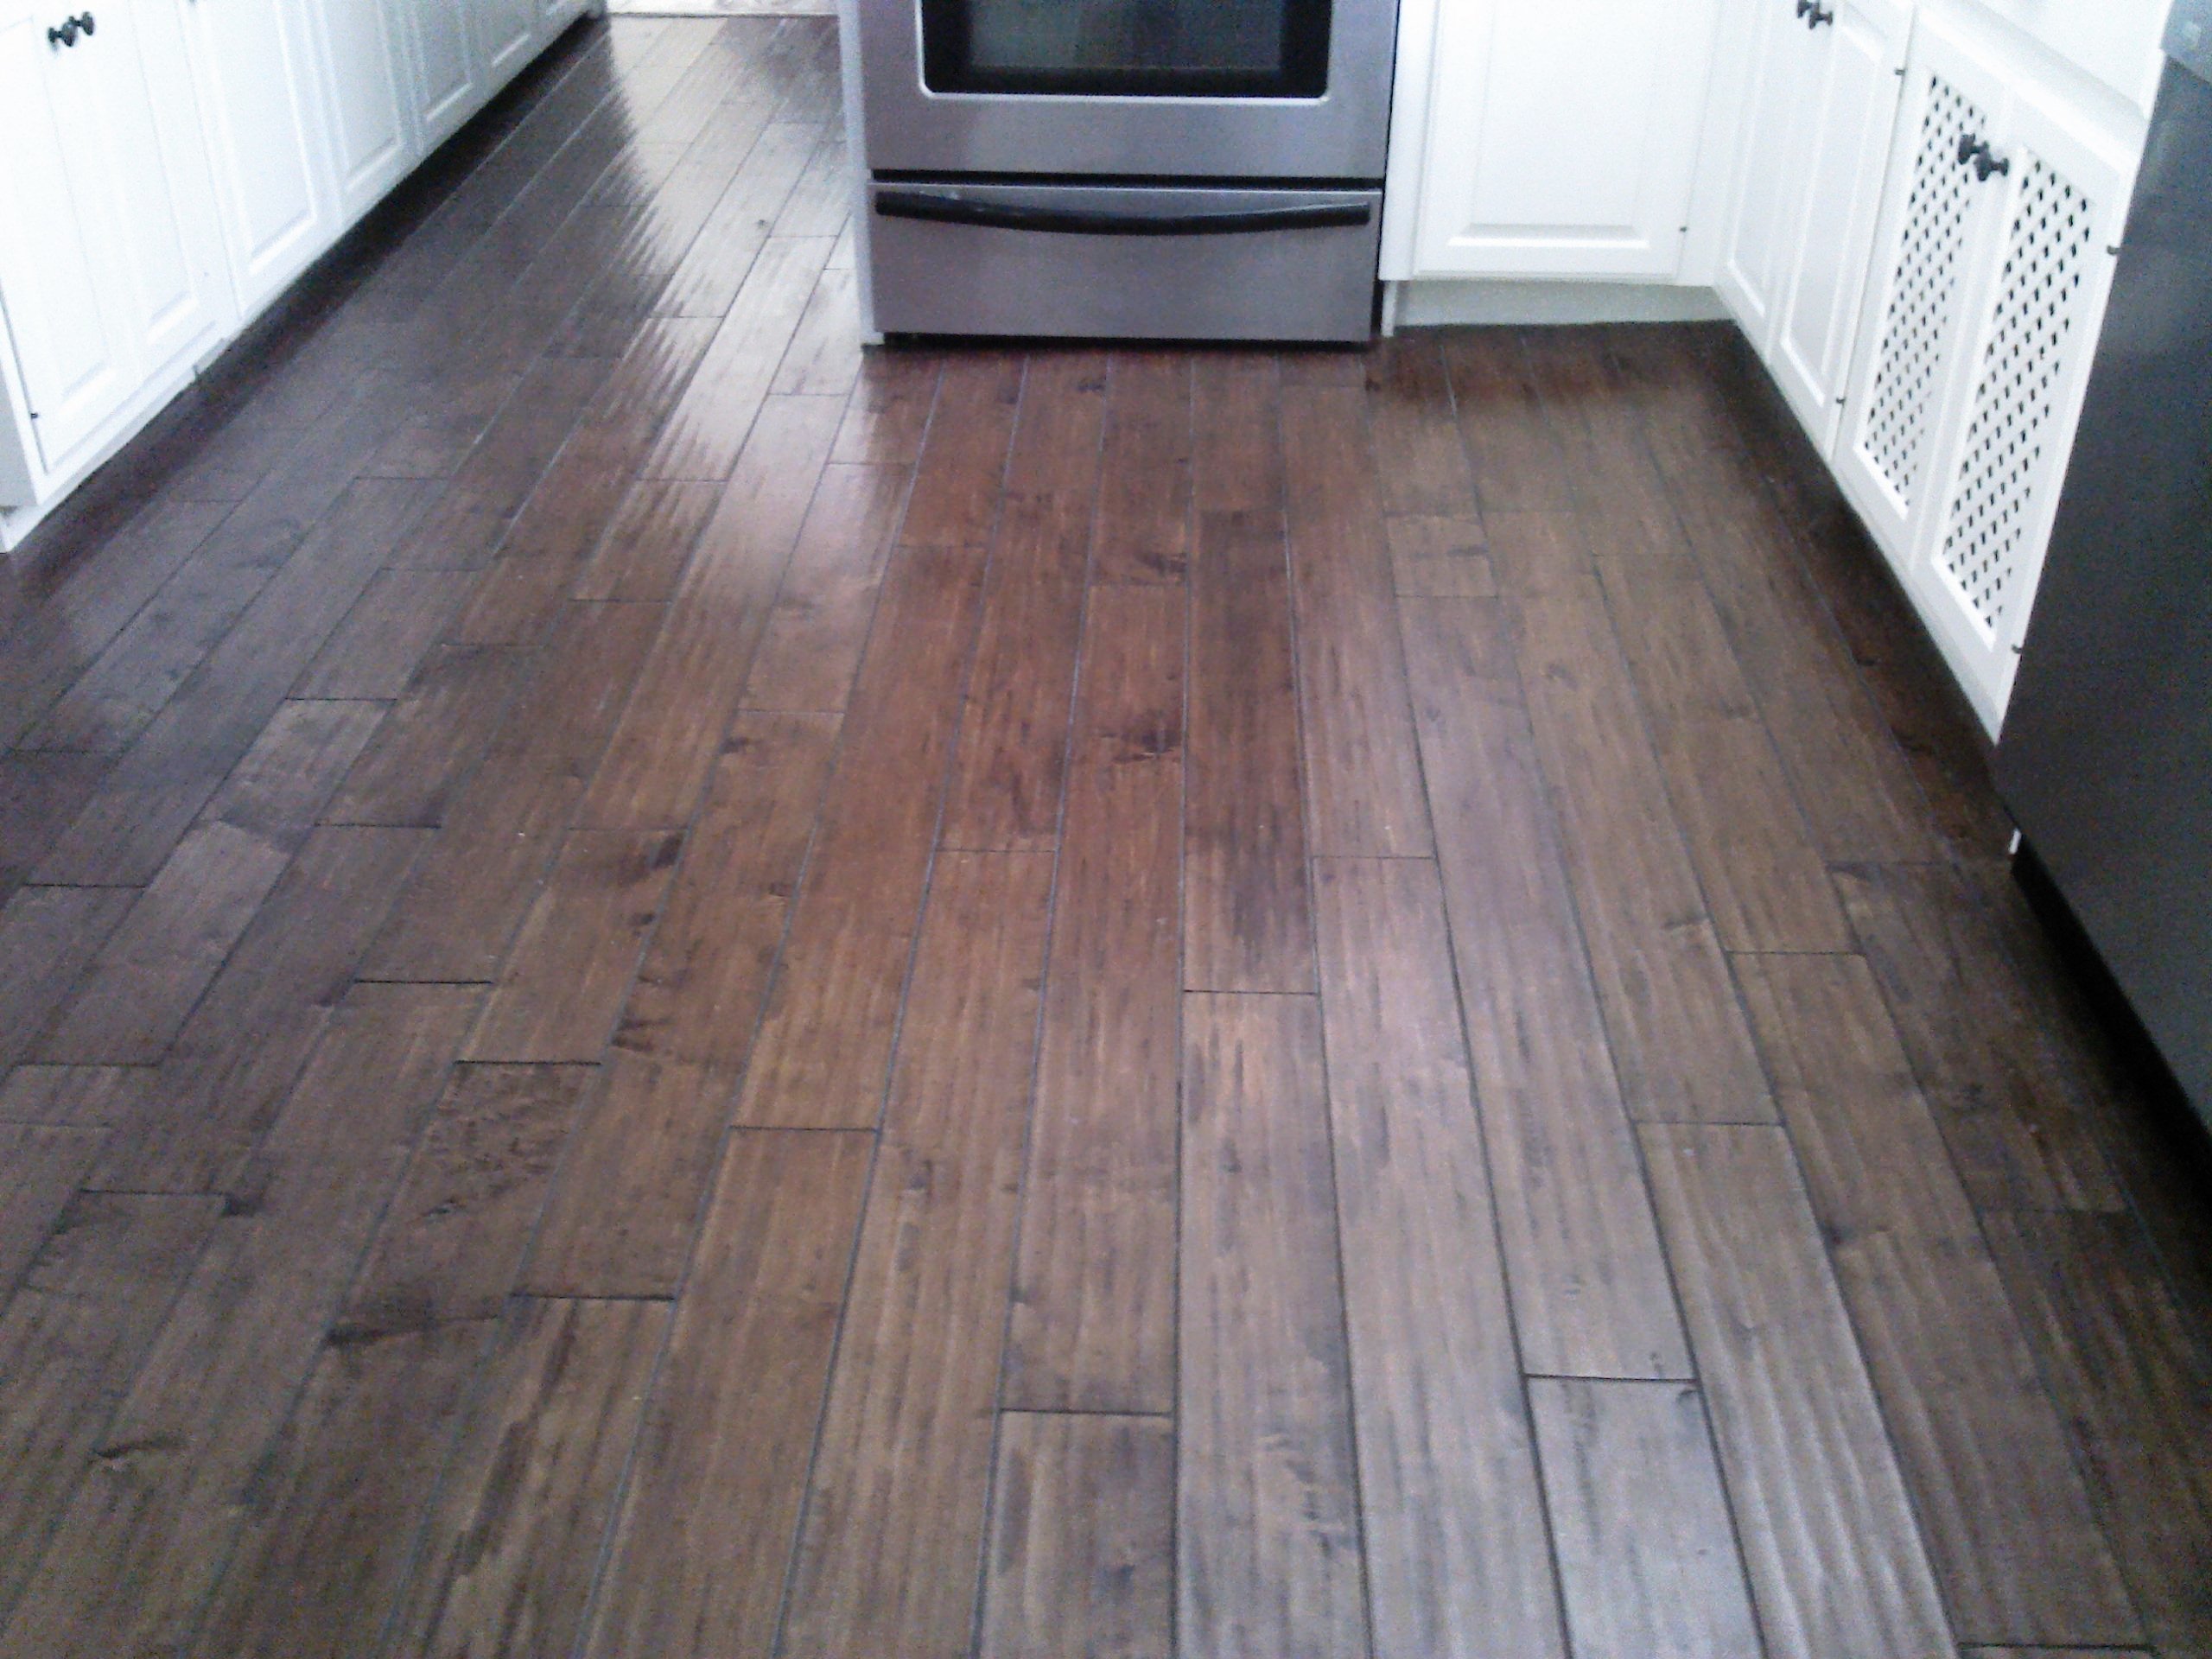 Laminate Wood Flooring In Kitchen, Tile That Looks Like Wood Reviews